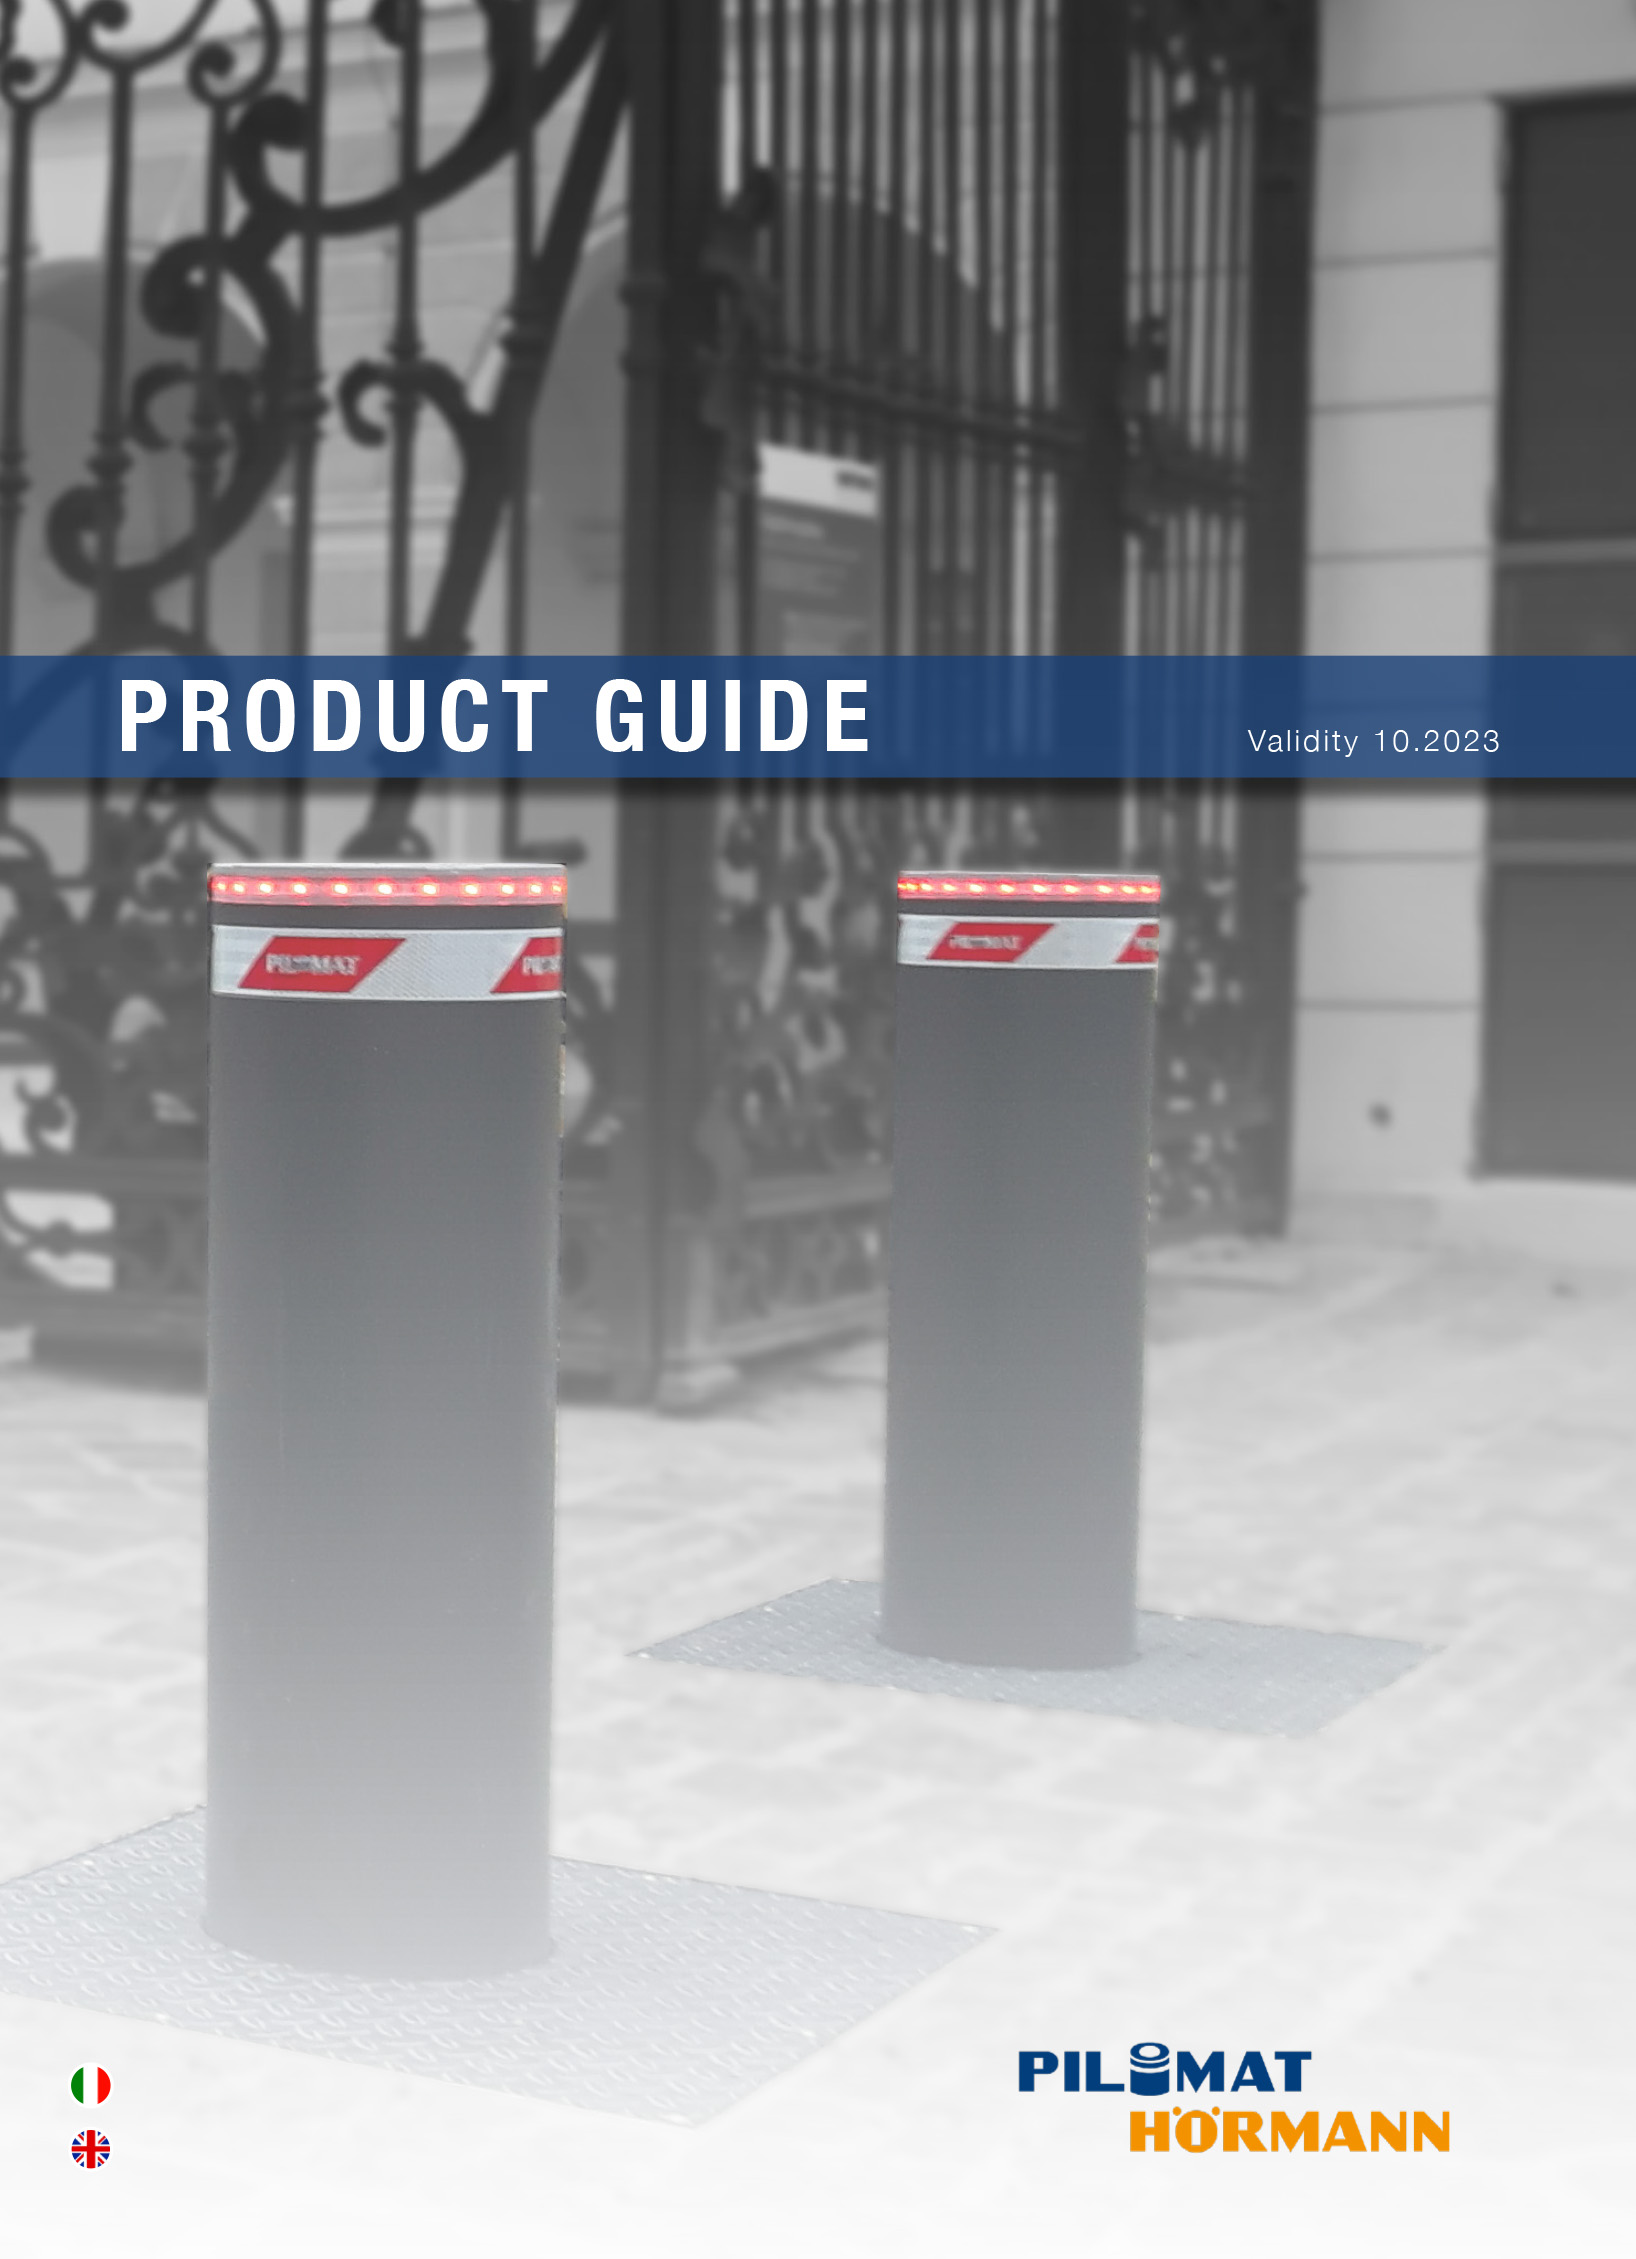 Cover page of the Pilomat Product Guide